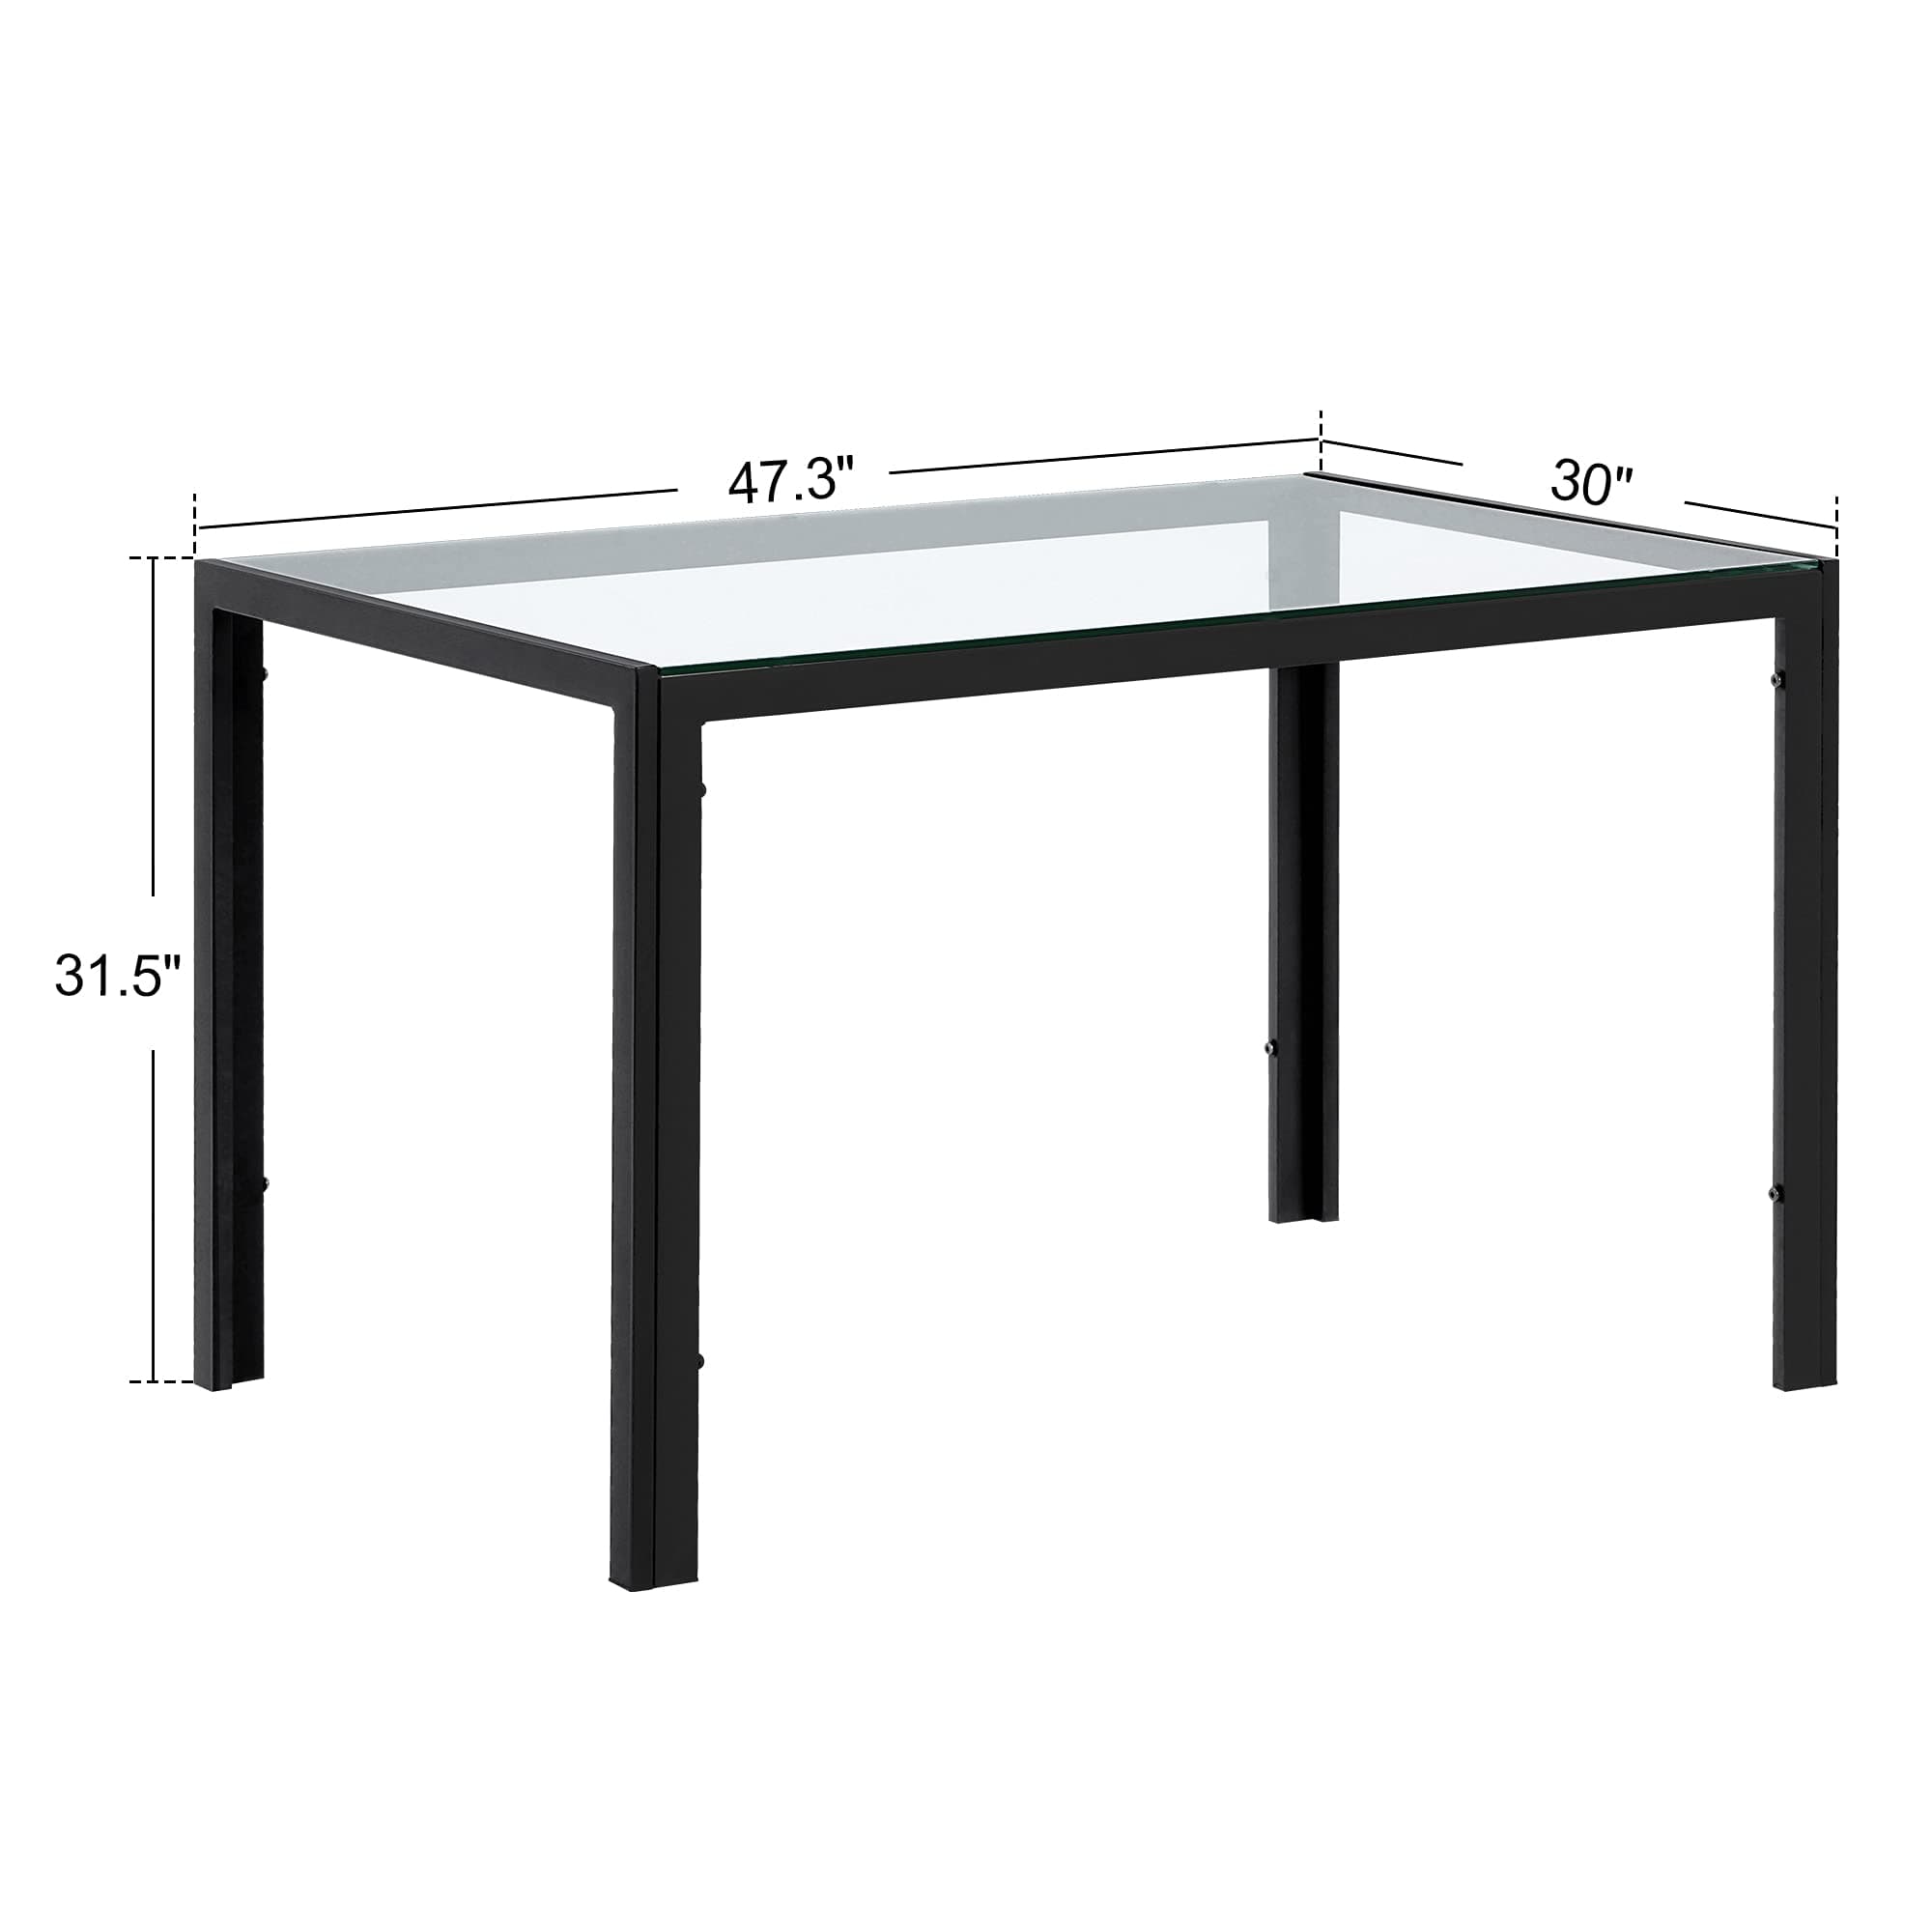 Ivinta Dining Room Table Rectangular Glass, Outdoor Black Dining Tables for 4/6